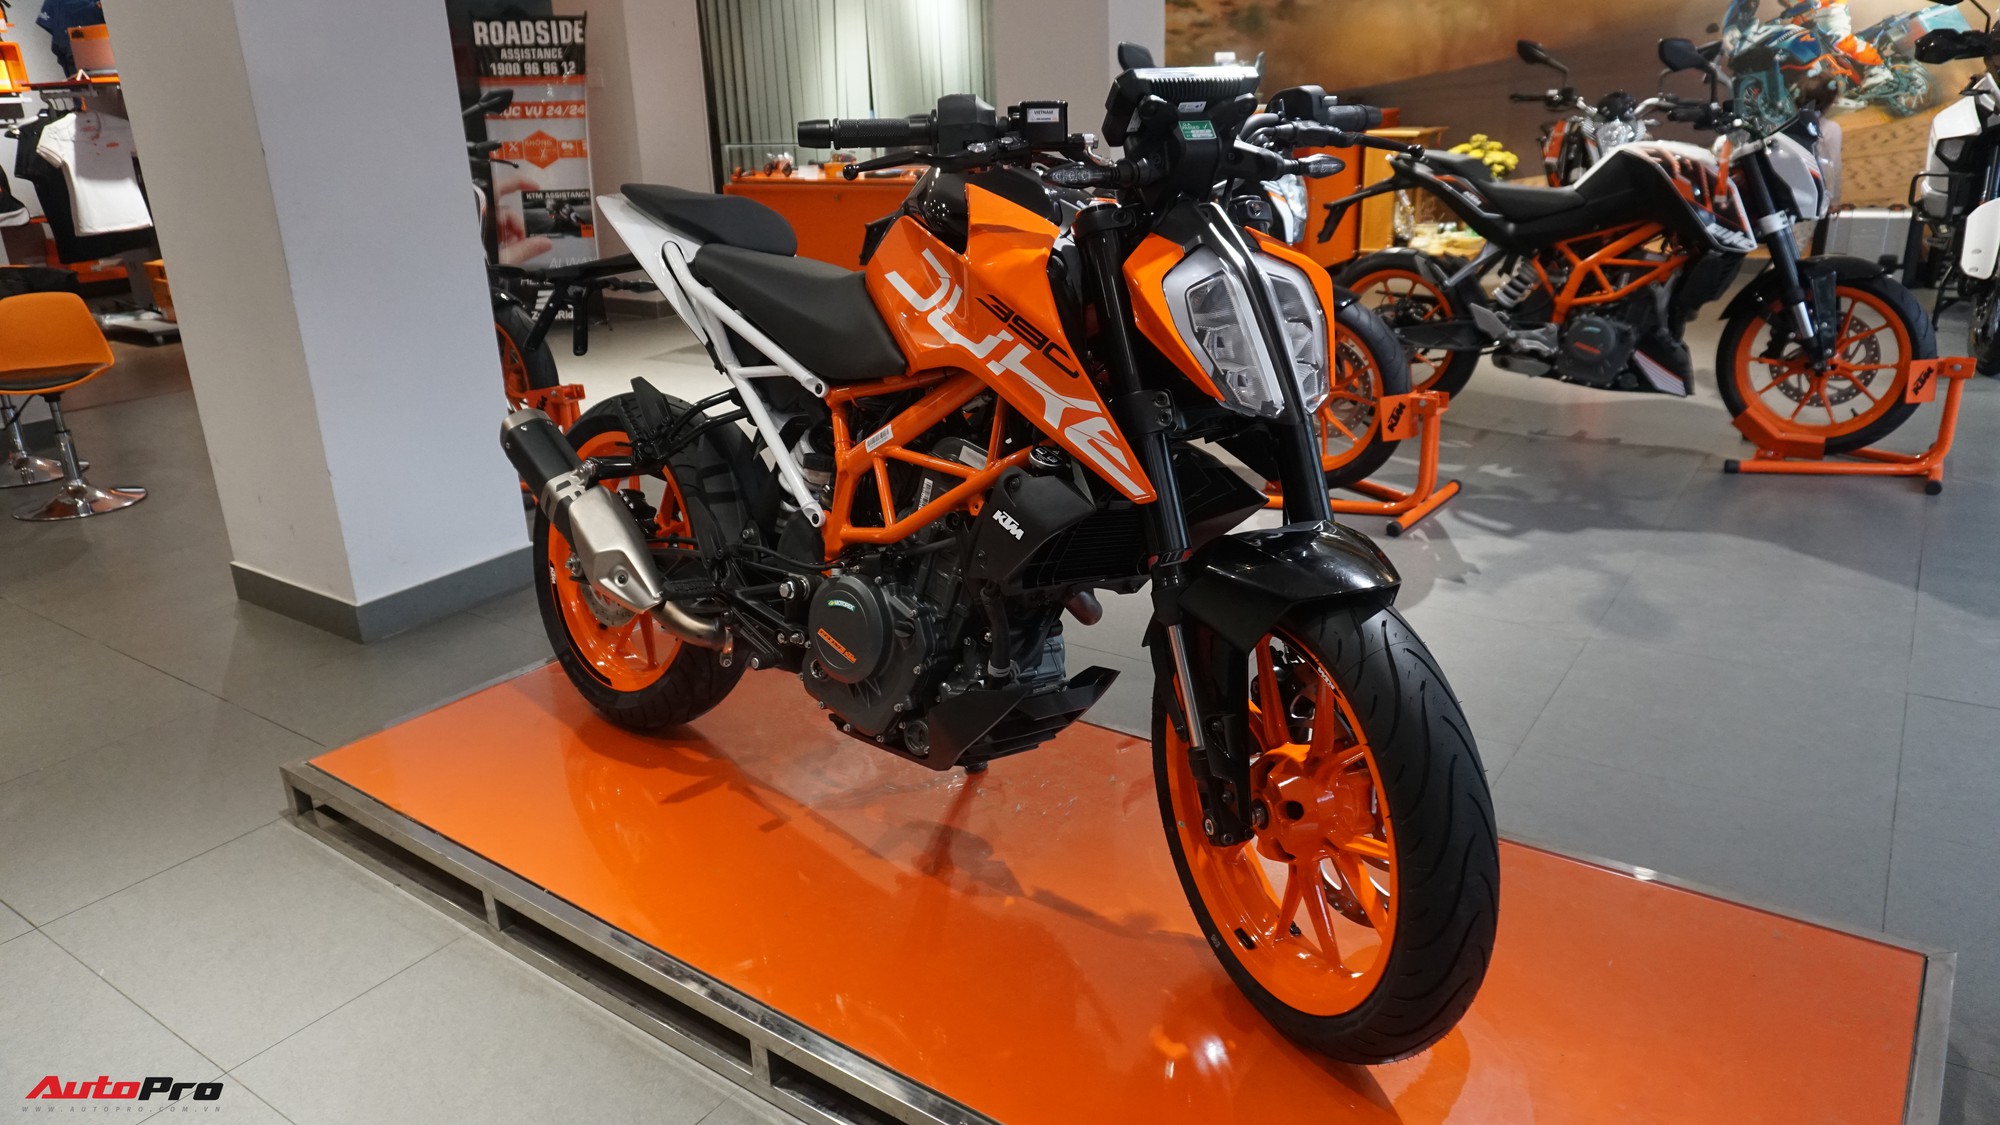 2018 KTM 390 Duke MD Ride Review  MotorcycleDailycom  Motorcycle News  Editorials Product Reviews and Bike Reviews